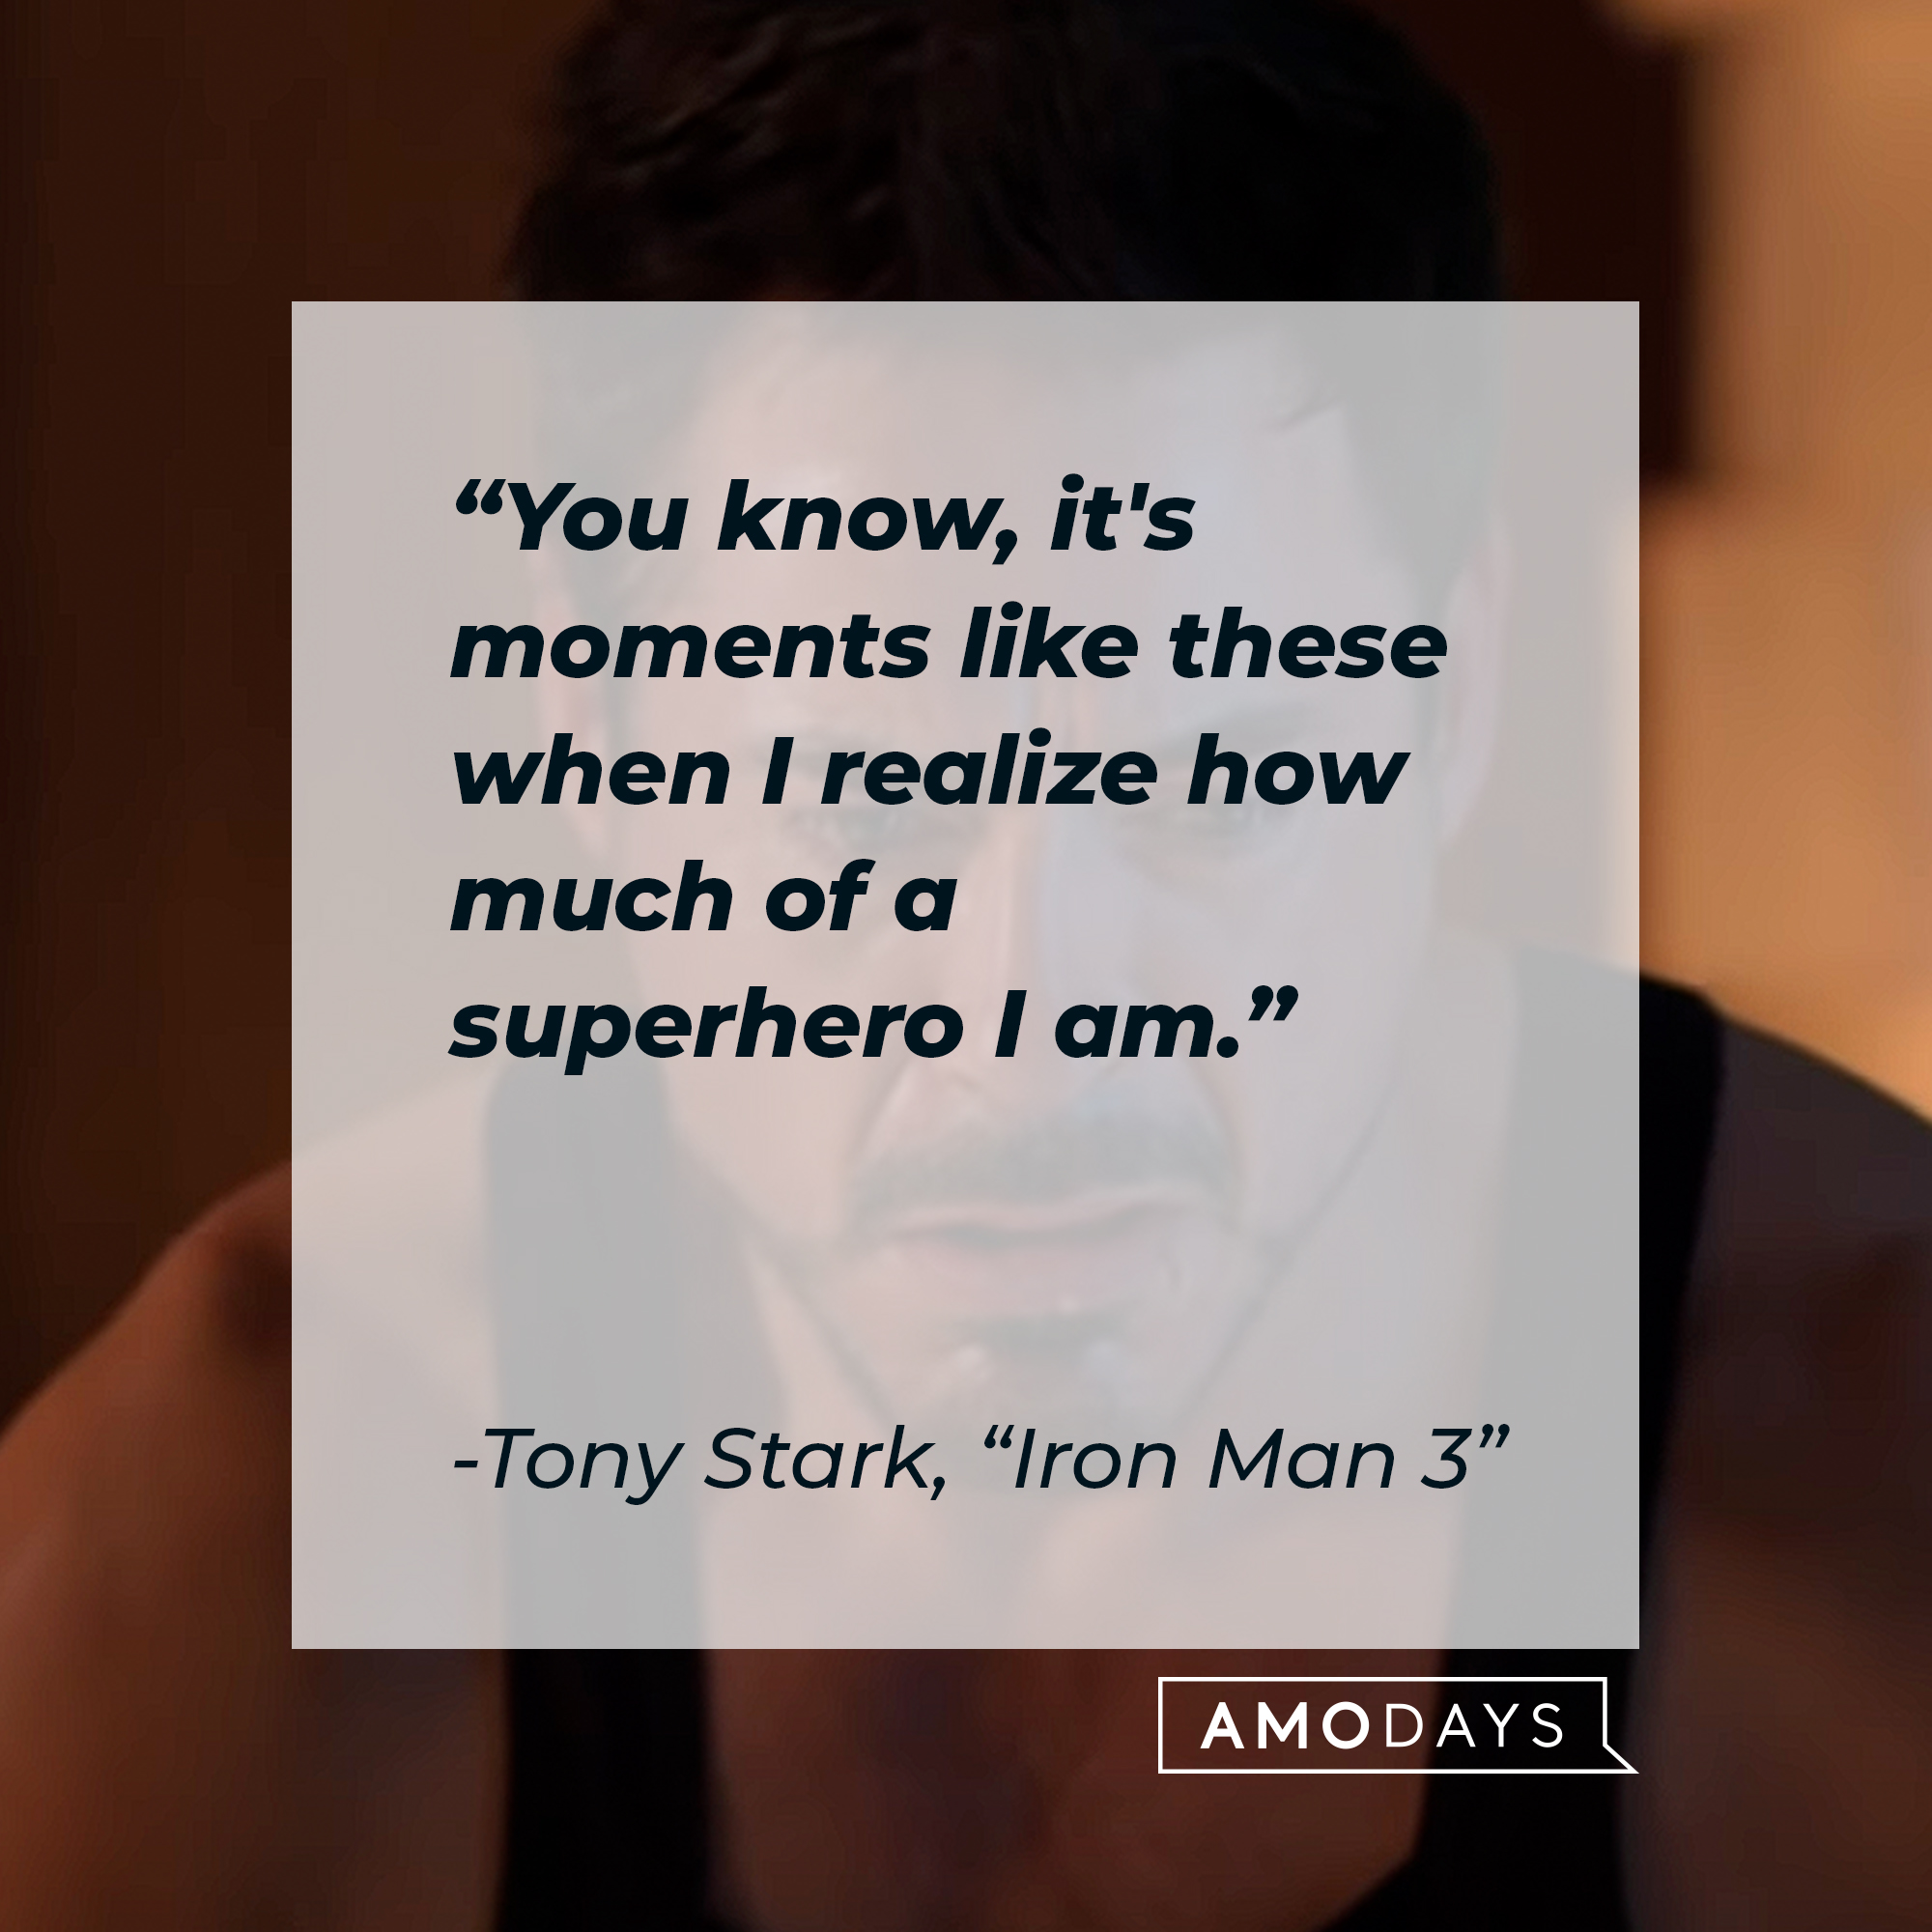 Tony Stark’s quote: "You know, it's moments like these when I realize how much of a superhero I am."  | Image: AmoDays